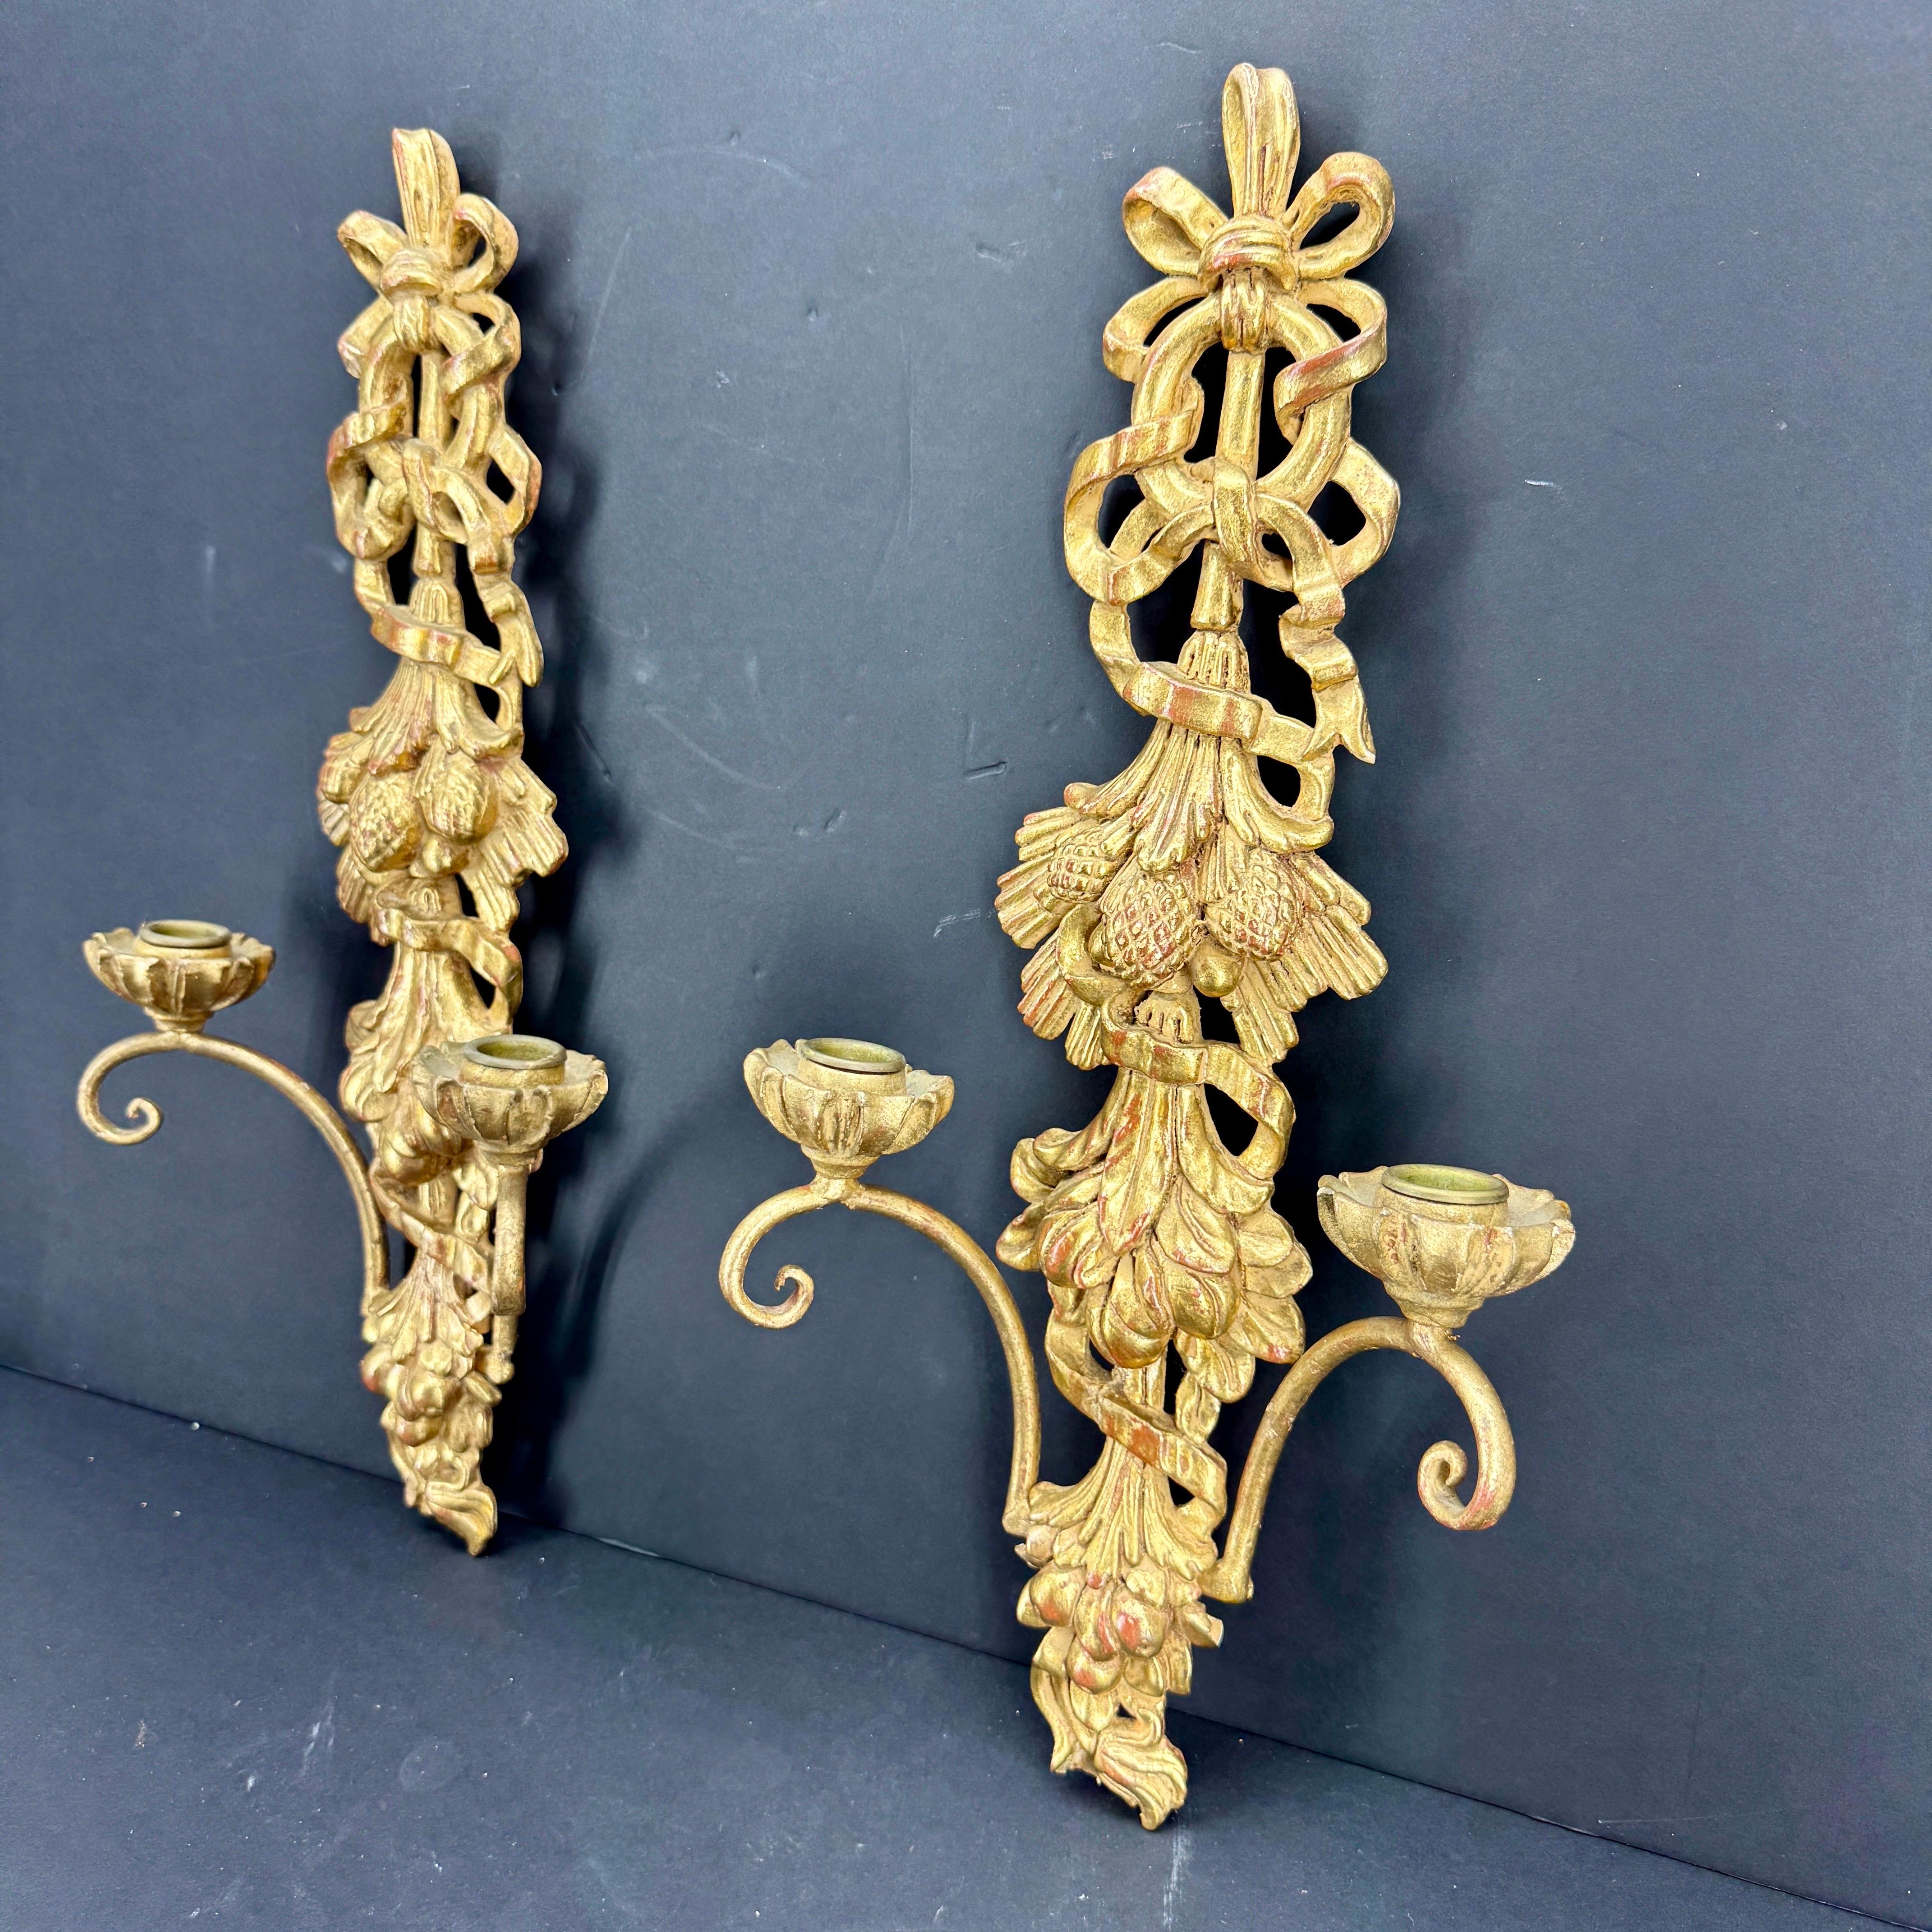 Giltwood Pair of Louis Seize Wall Candle Sconces, Italy 

Elegant wall candle sconces with beautiful detail throughout, including bows and ribbons as well as fruits. The hand-painted gold gilt finish on this pair has a very pleasing aged look. These